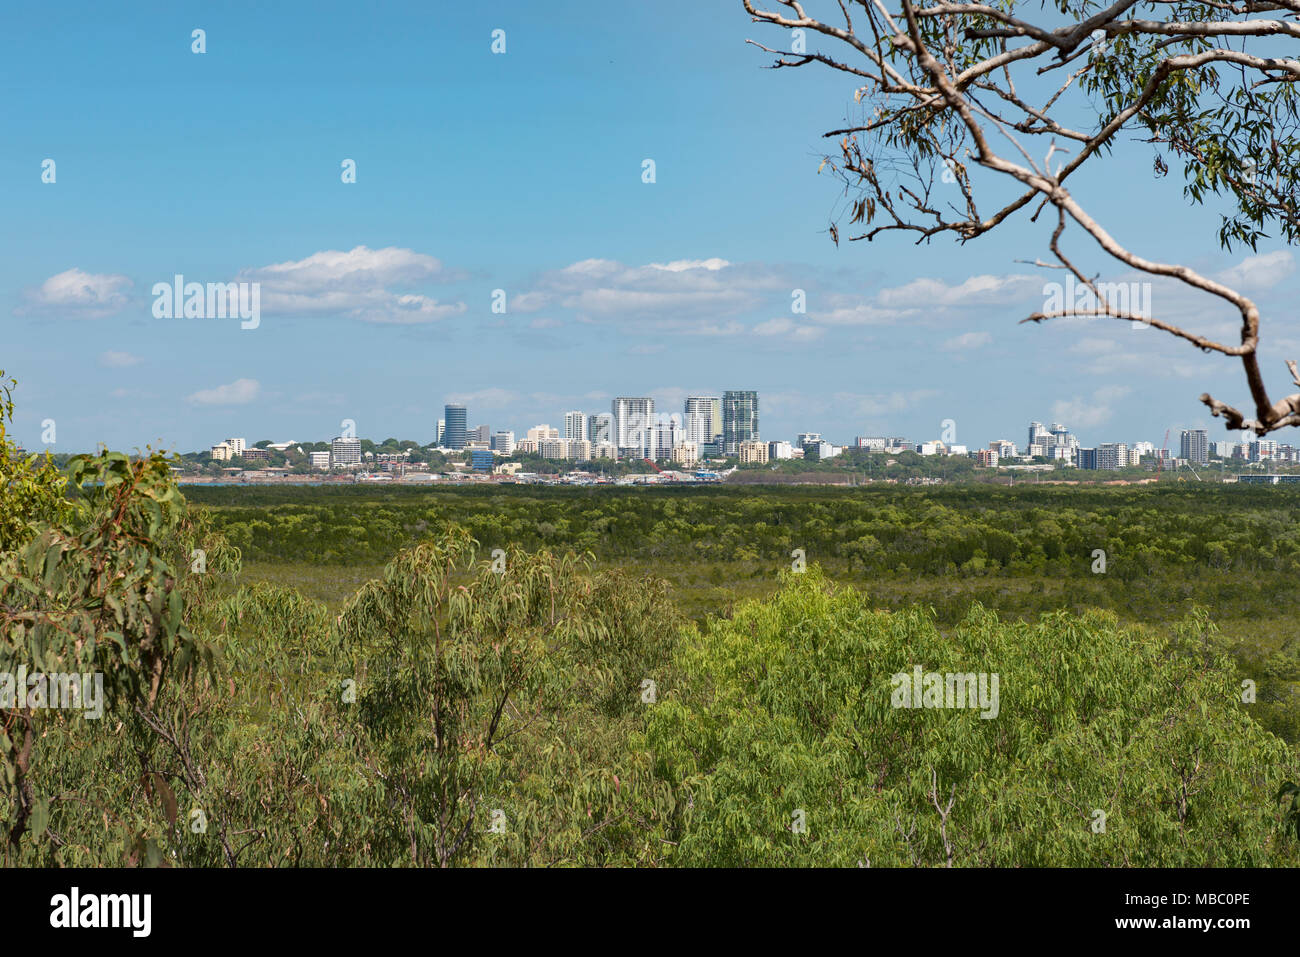 Darwin, viewed from Charles Darwin National Park, is the capital city of the Northern Territory of Australia. Stock Photo